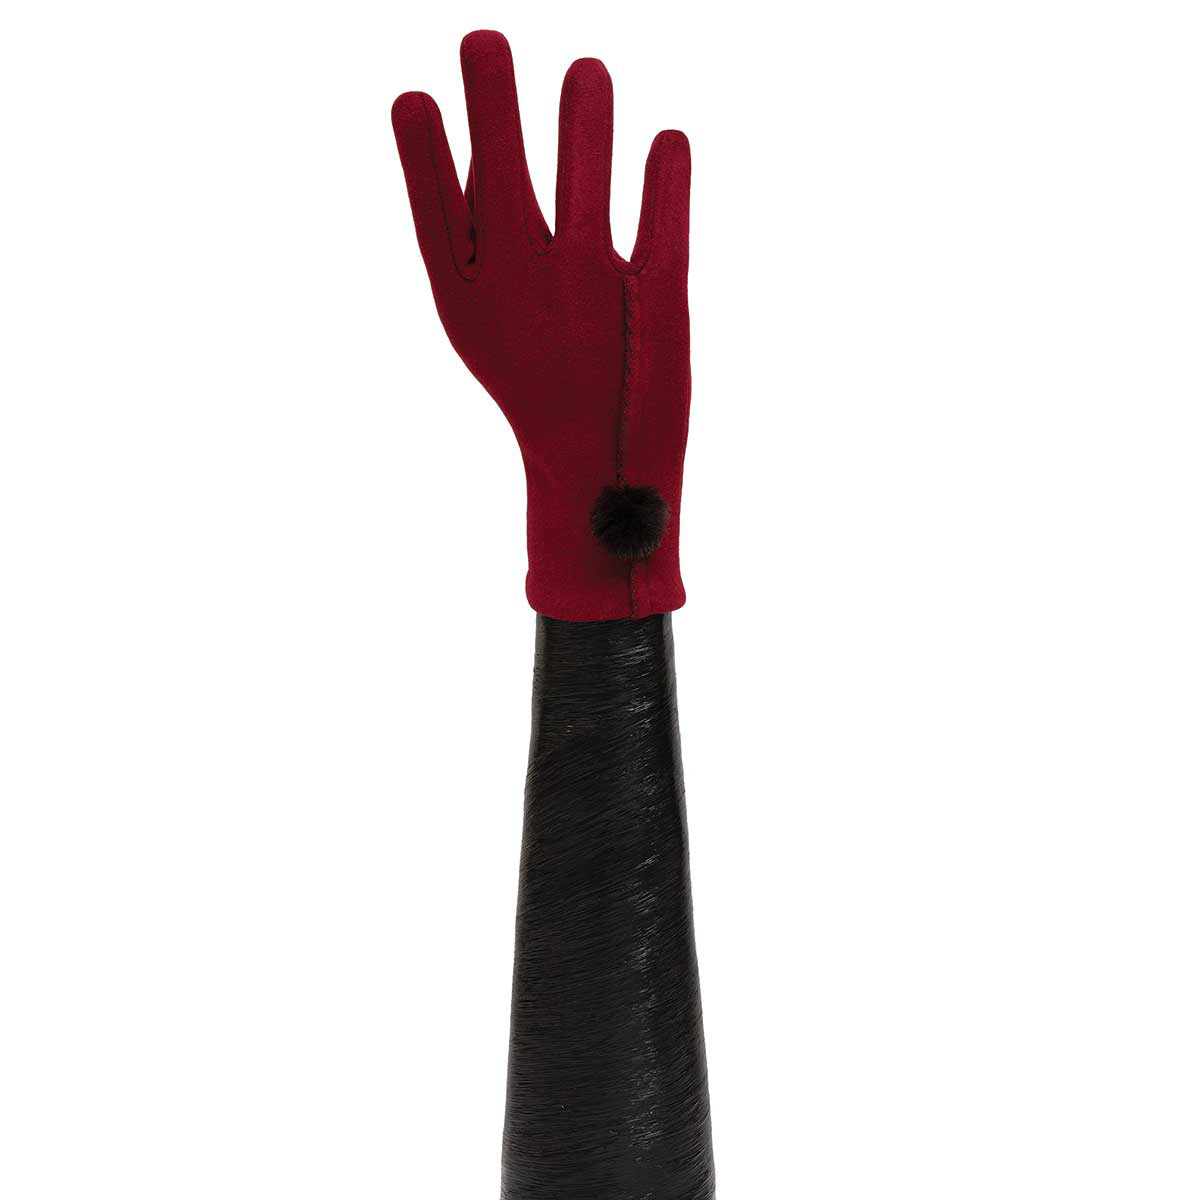 RED GLOVES WITH BLACK PUFF BALL